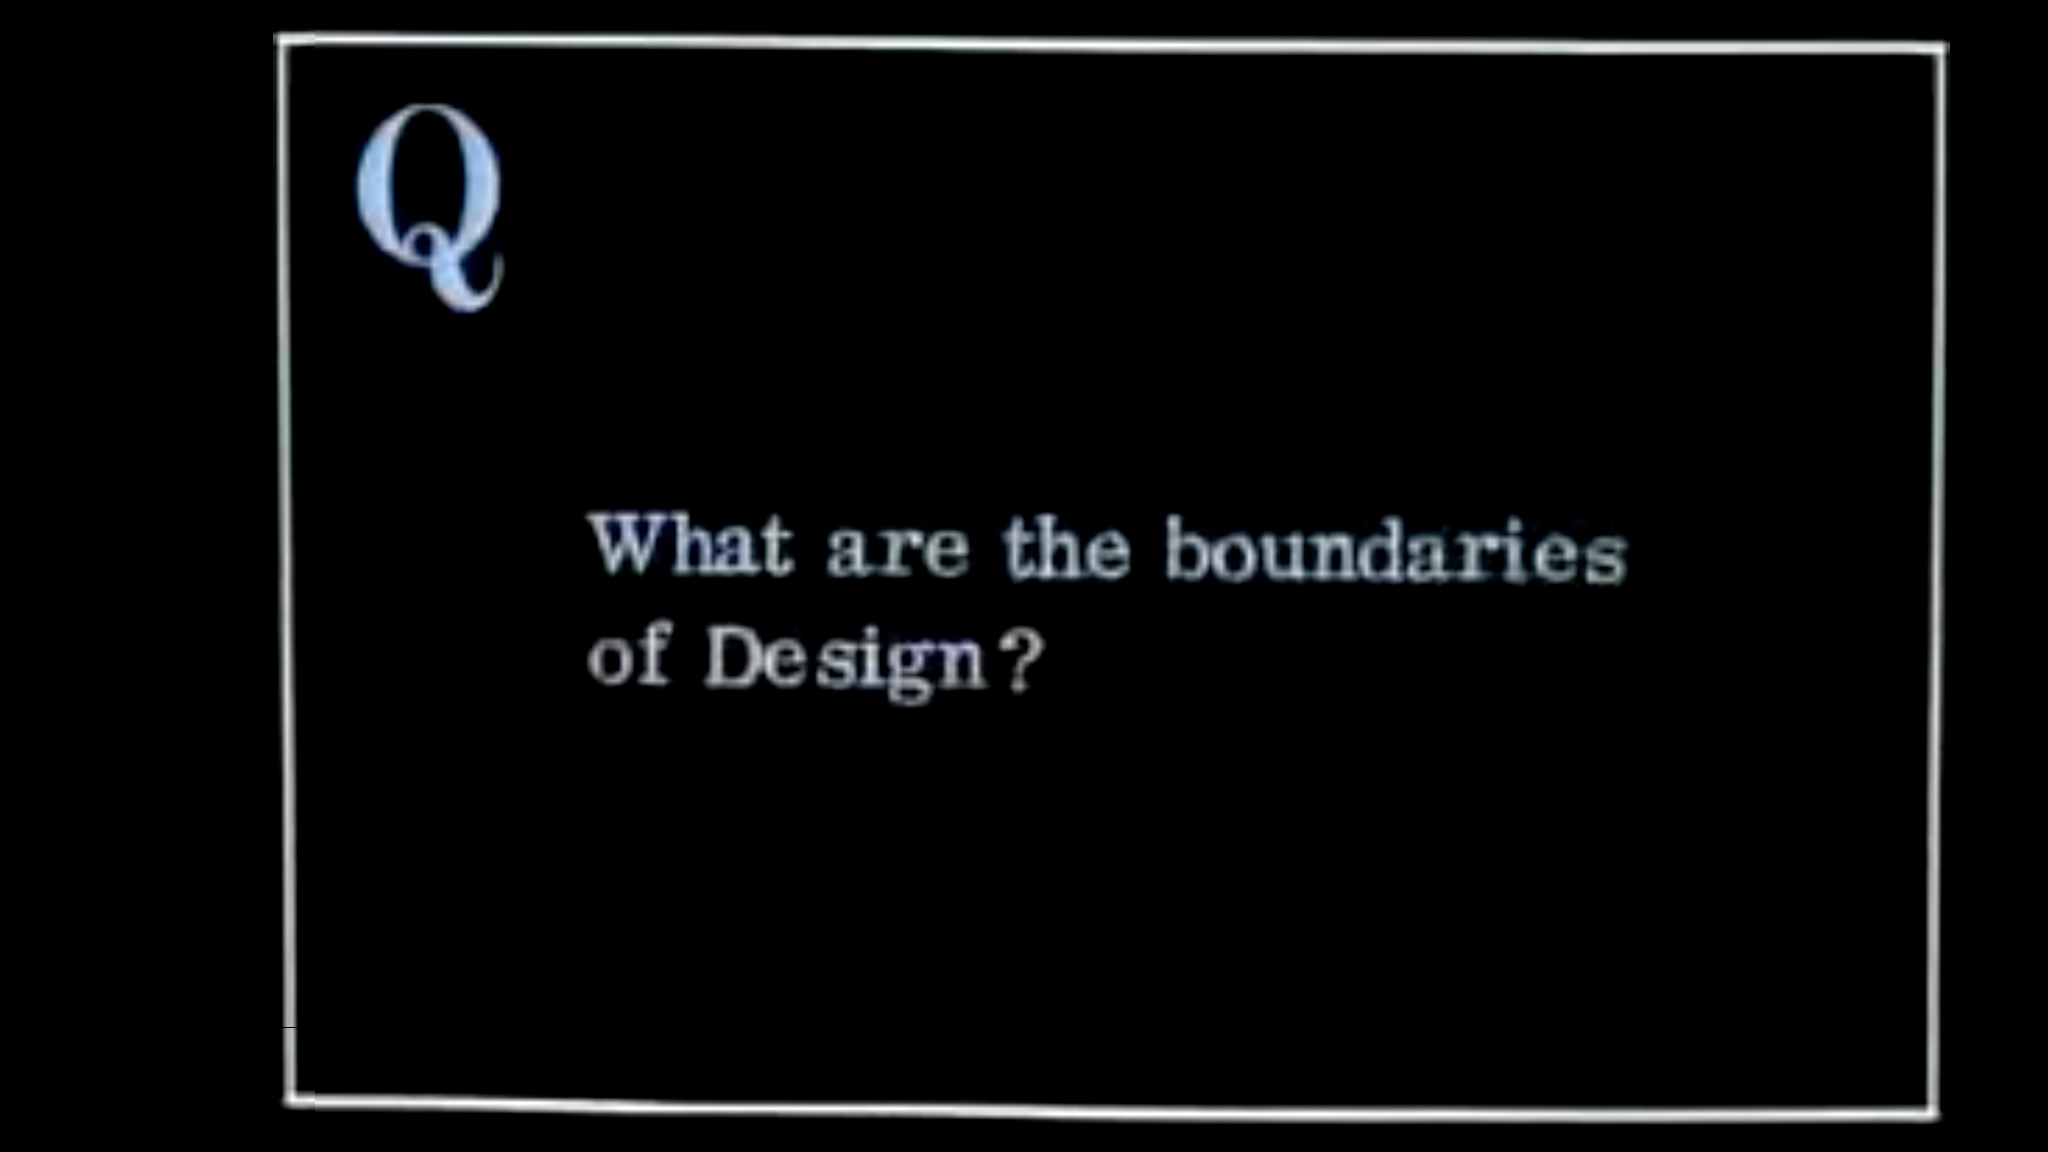 A screen from a 1970s interview with Charles Eames that says "What are the boundaries of design"?